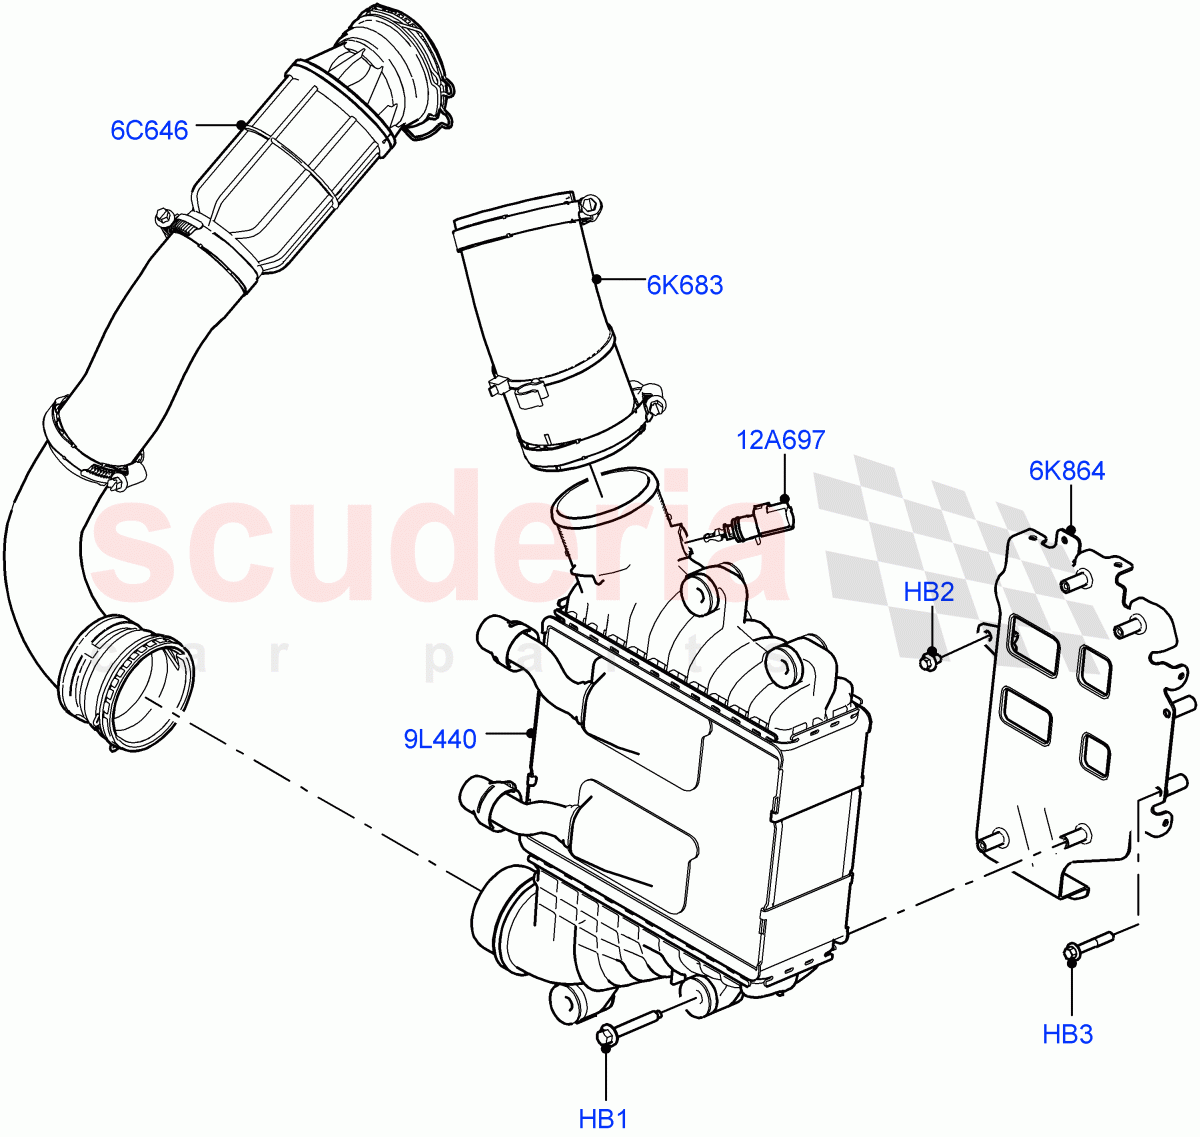 Intercooler/Air Ducts And Hoses(2.0L I4 DSL HIGH DOHC AJ200)((V)FROMJH000001) of Land Rover Land Rover Discovery Sport (2015+) [2.0 Turbo Diesel]